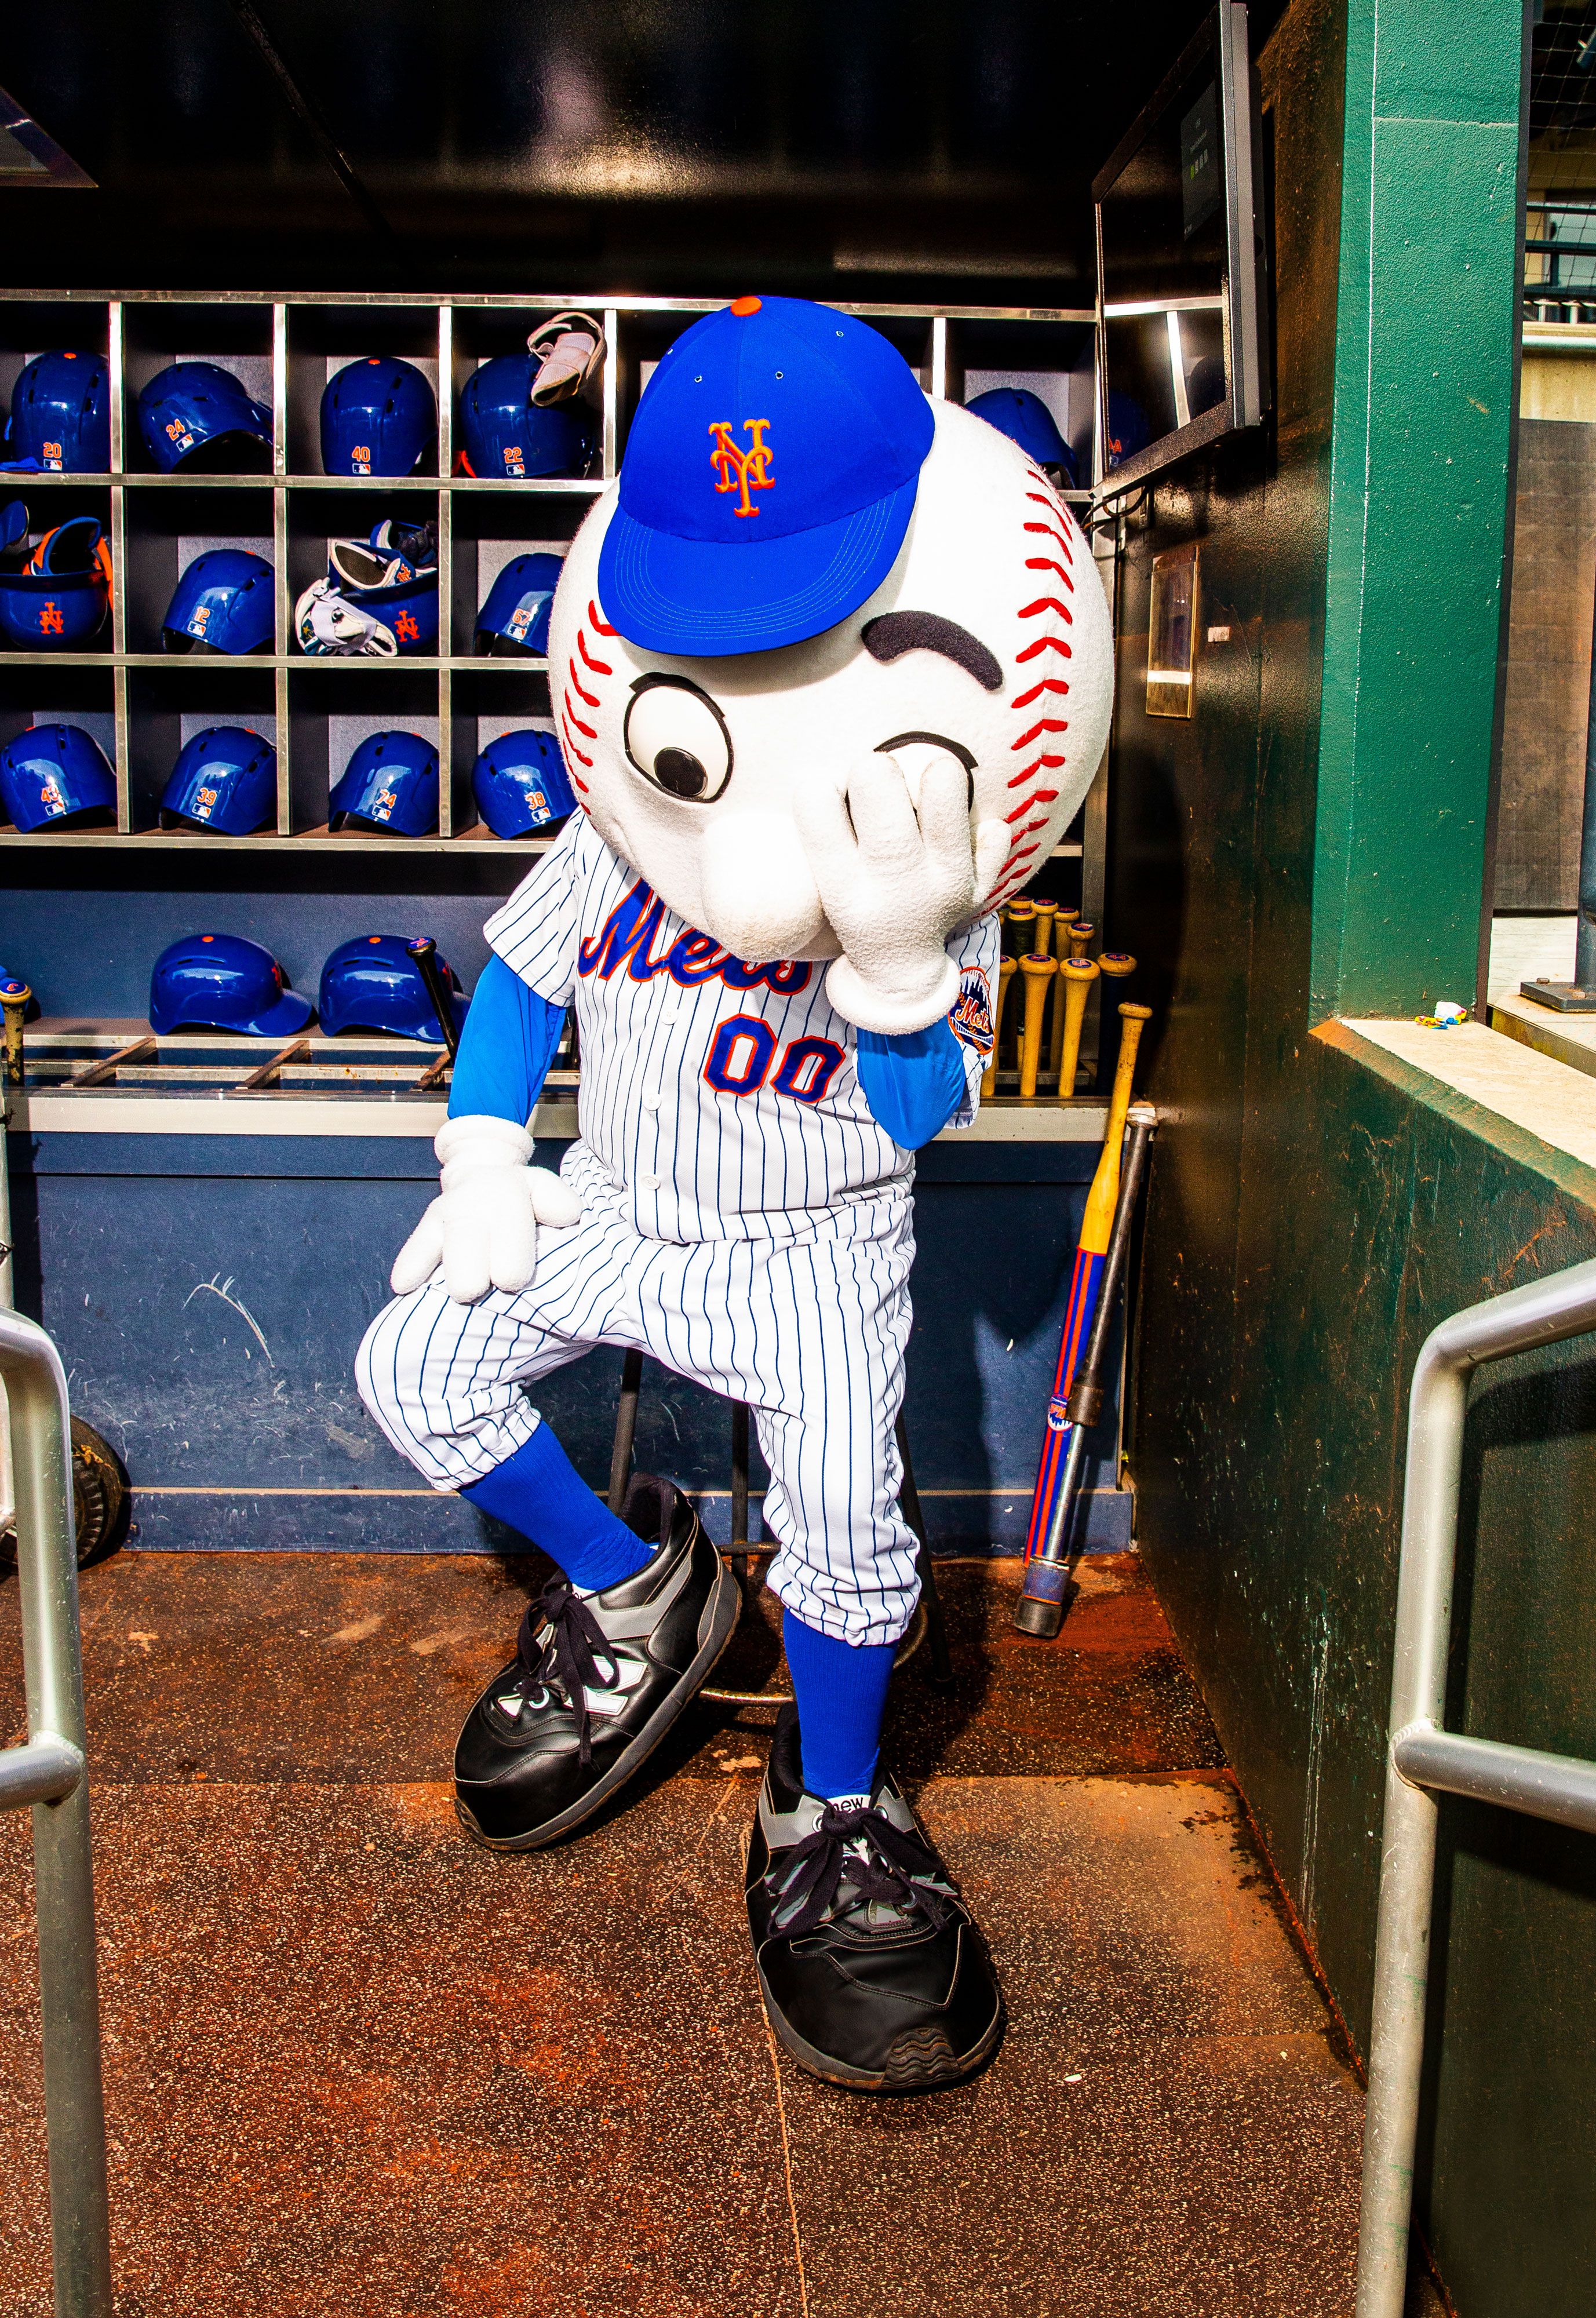 Mr. Met's Middle Finger and Six Other Famous Mascots-Gone-Wild Moments